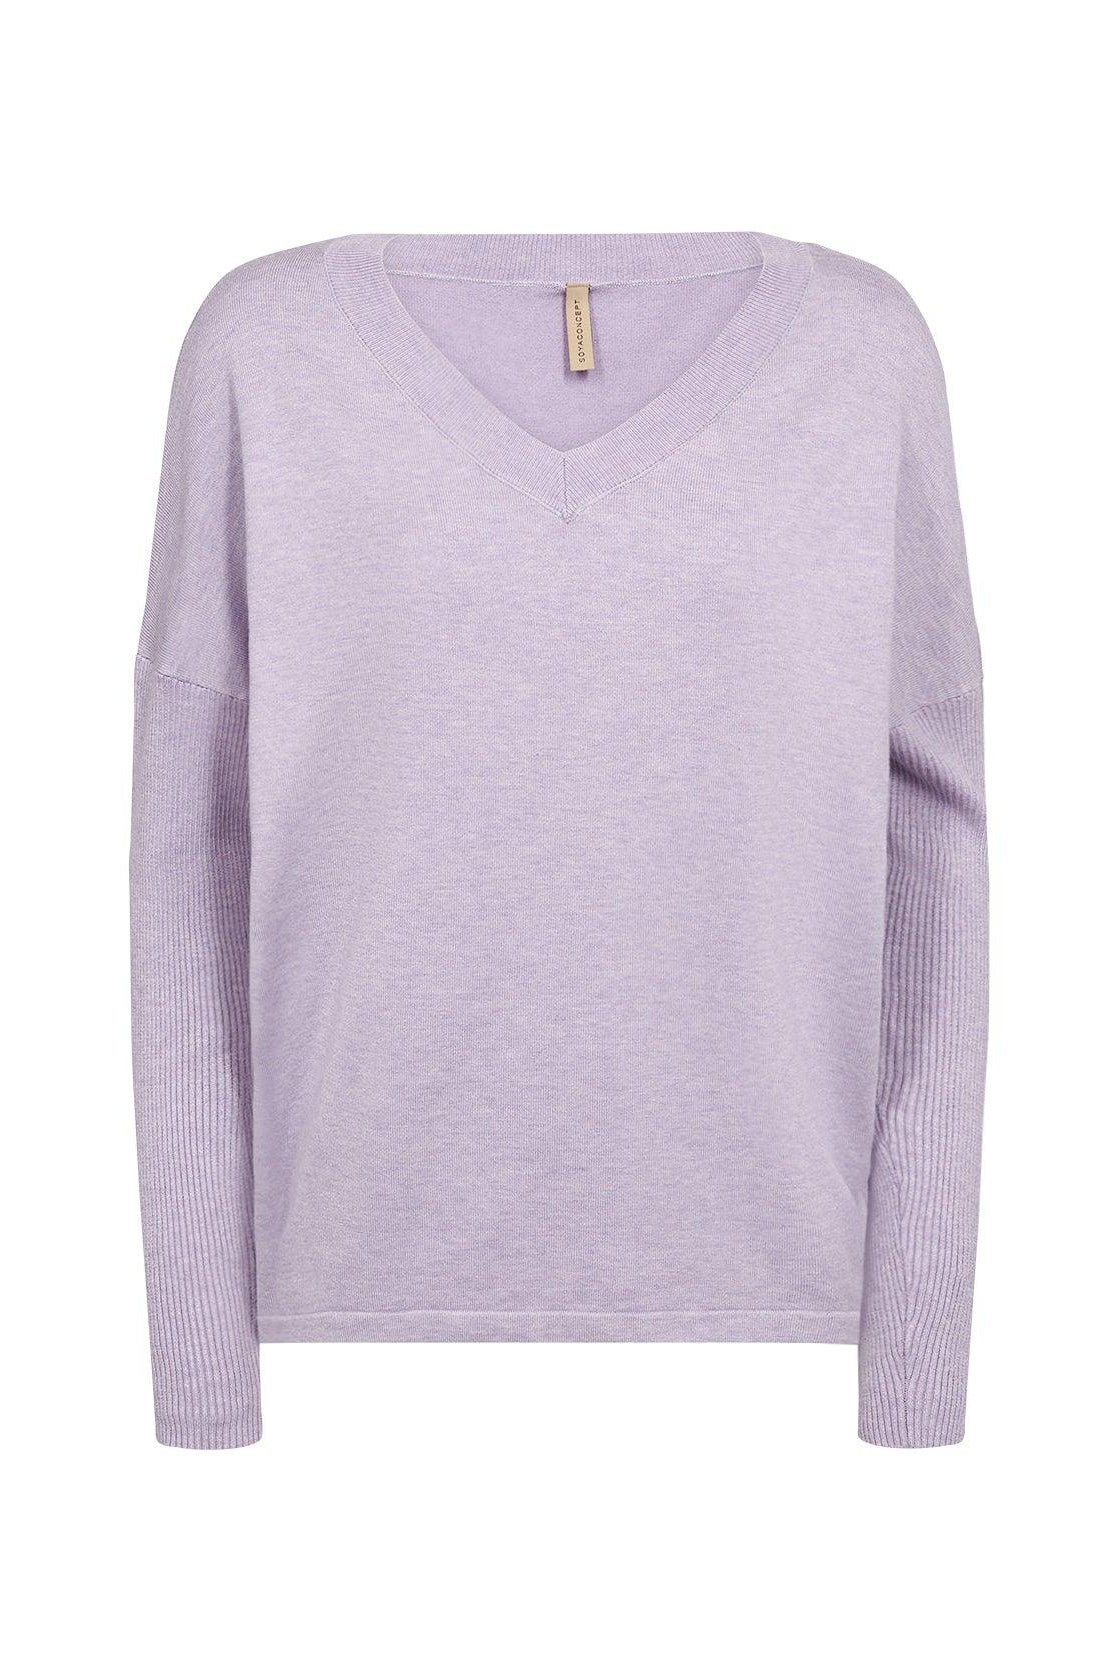 Lilac Spring Sweater - Fox Trot Boutique